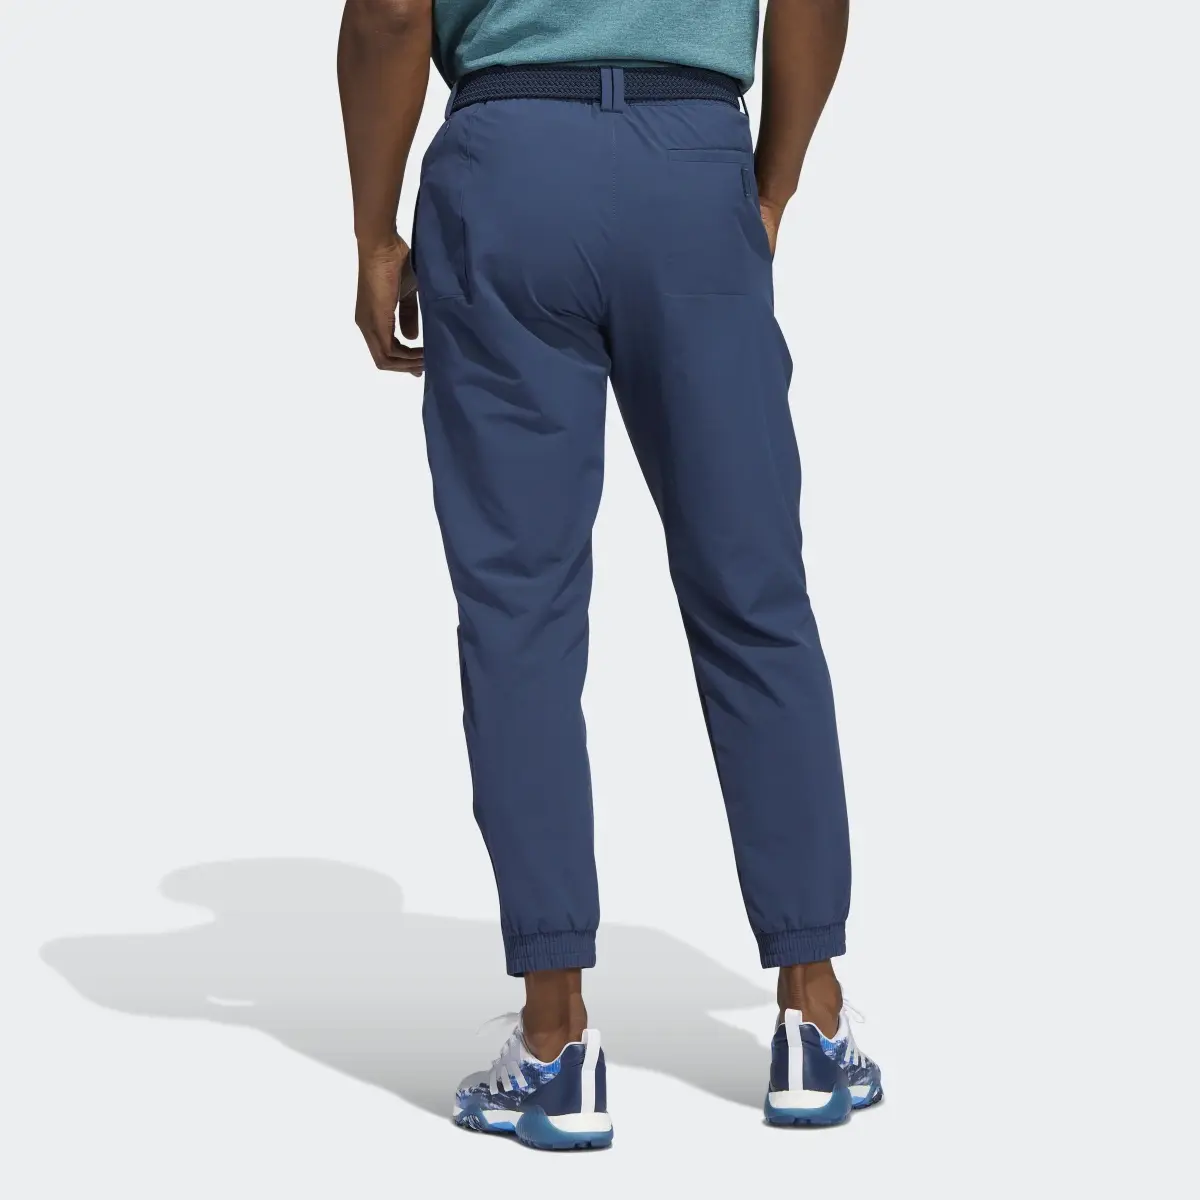 Adidas Go-To Commuter Golf Pants. 3